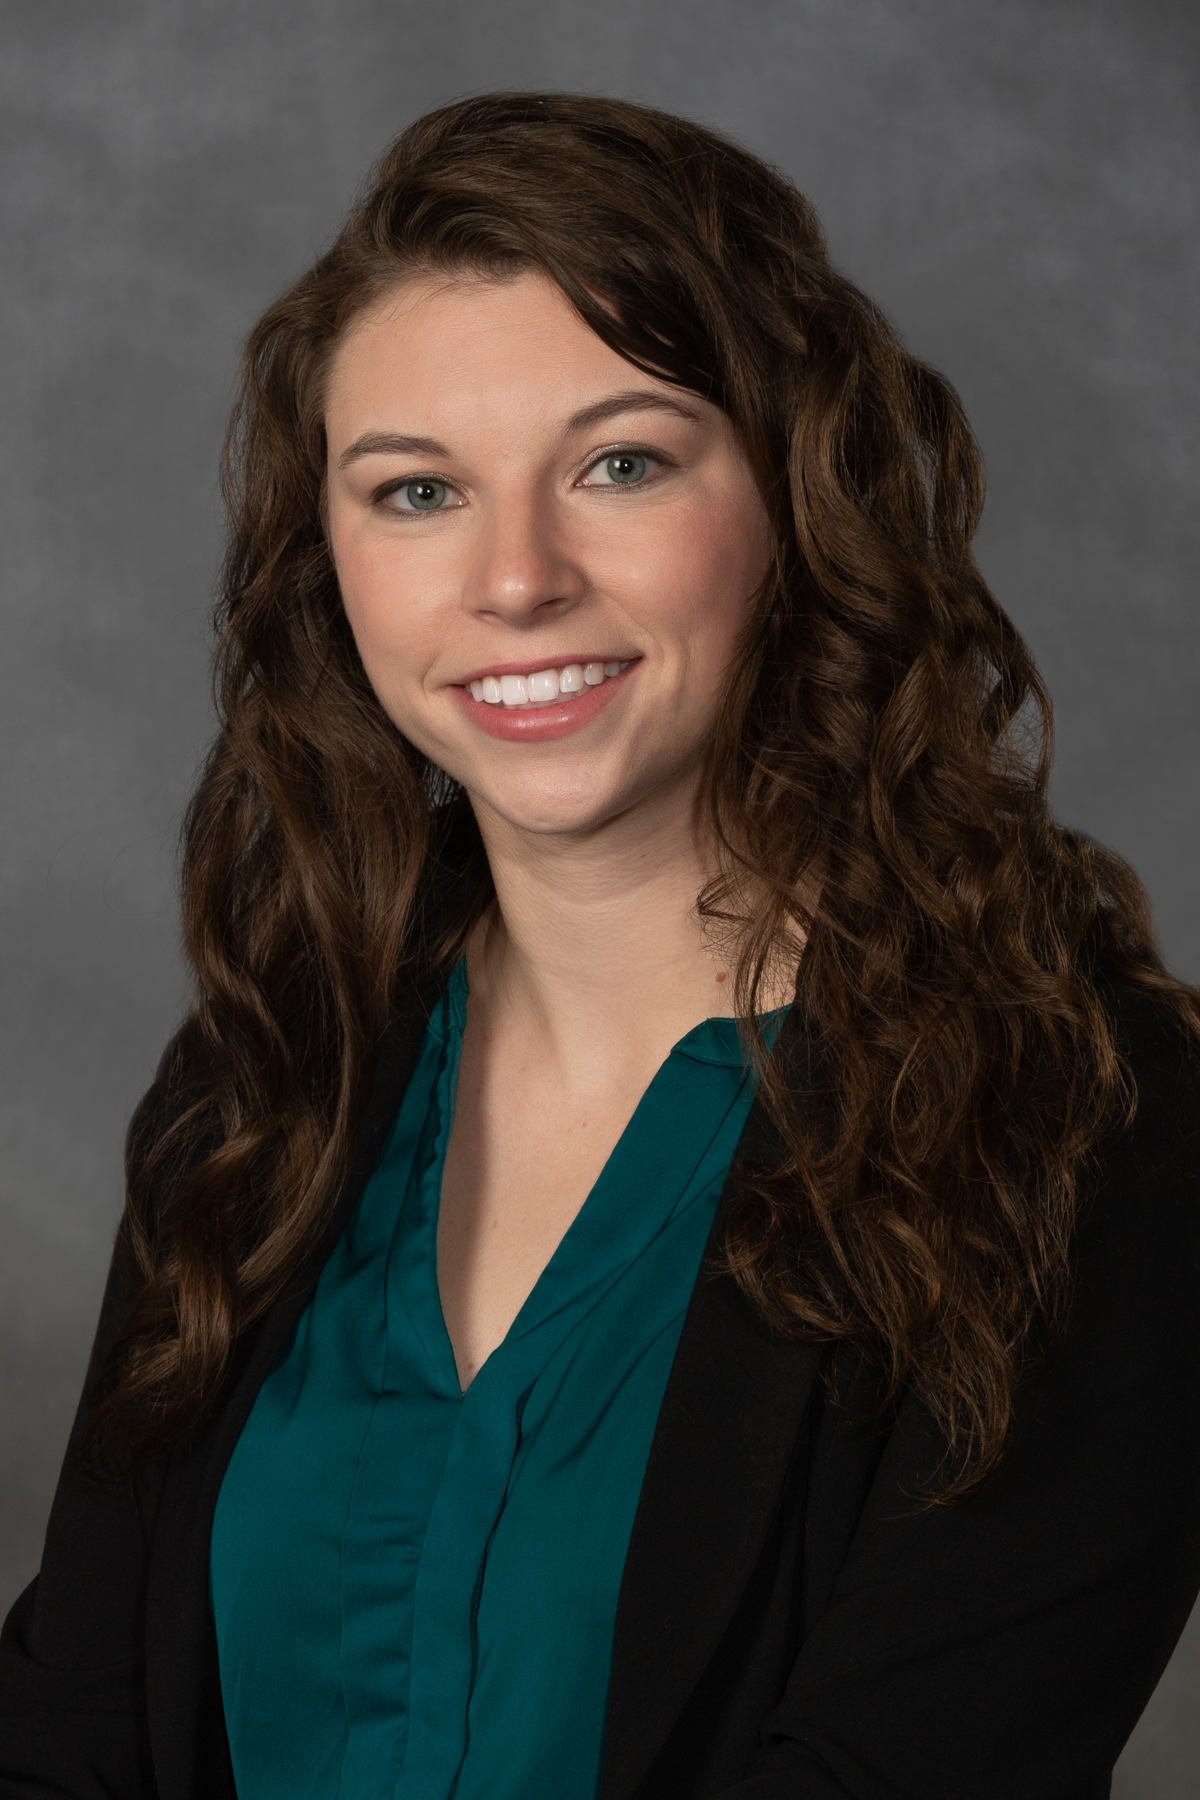 Formal picture of Dana O'Connell, ADA Specialist in Equity and Access Services